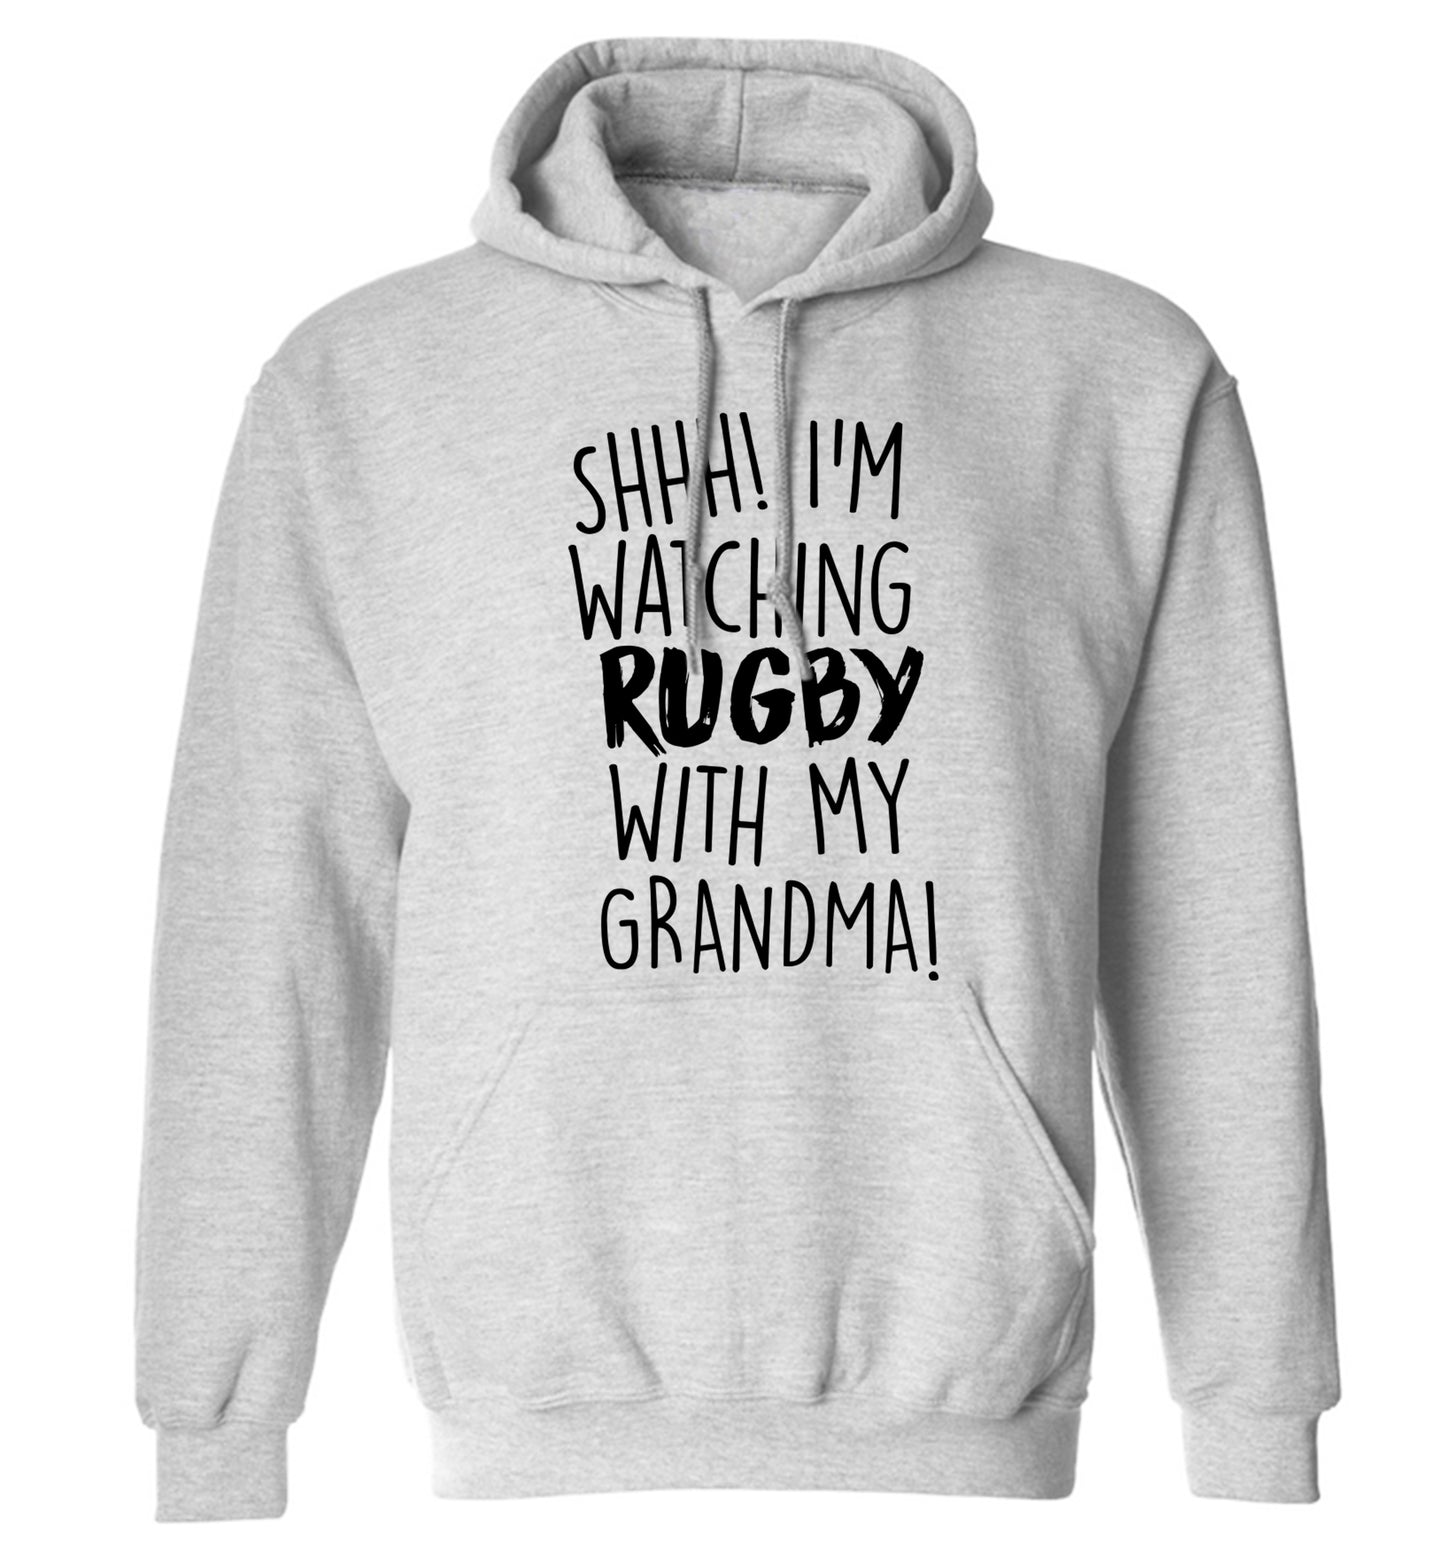 Shh I'm watching rugby with my grandma adults unisex grey hoodie 2XL